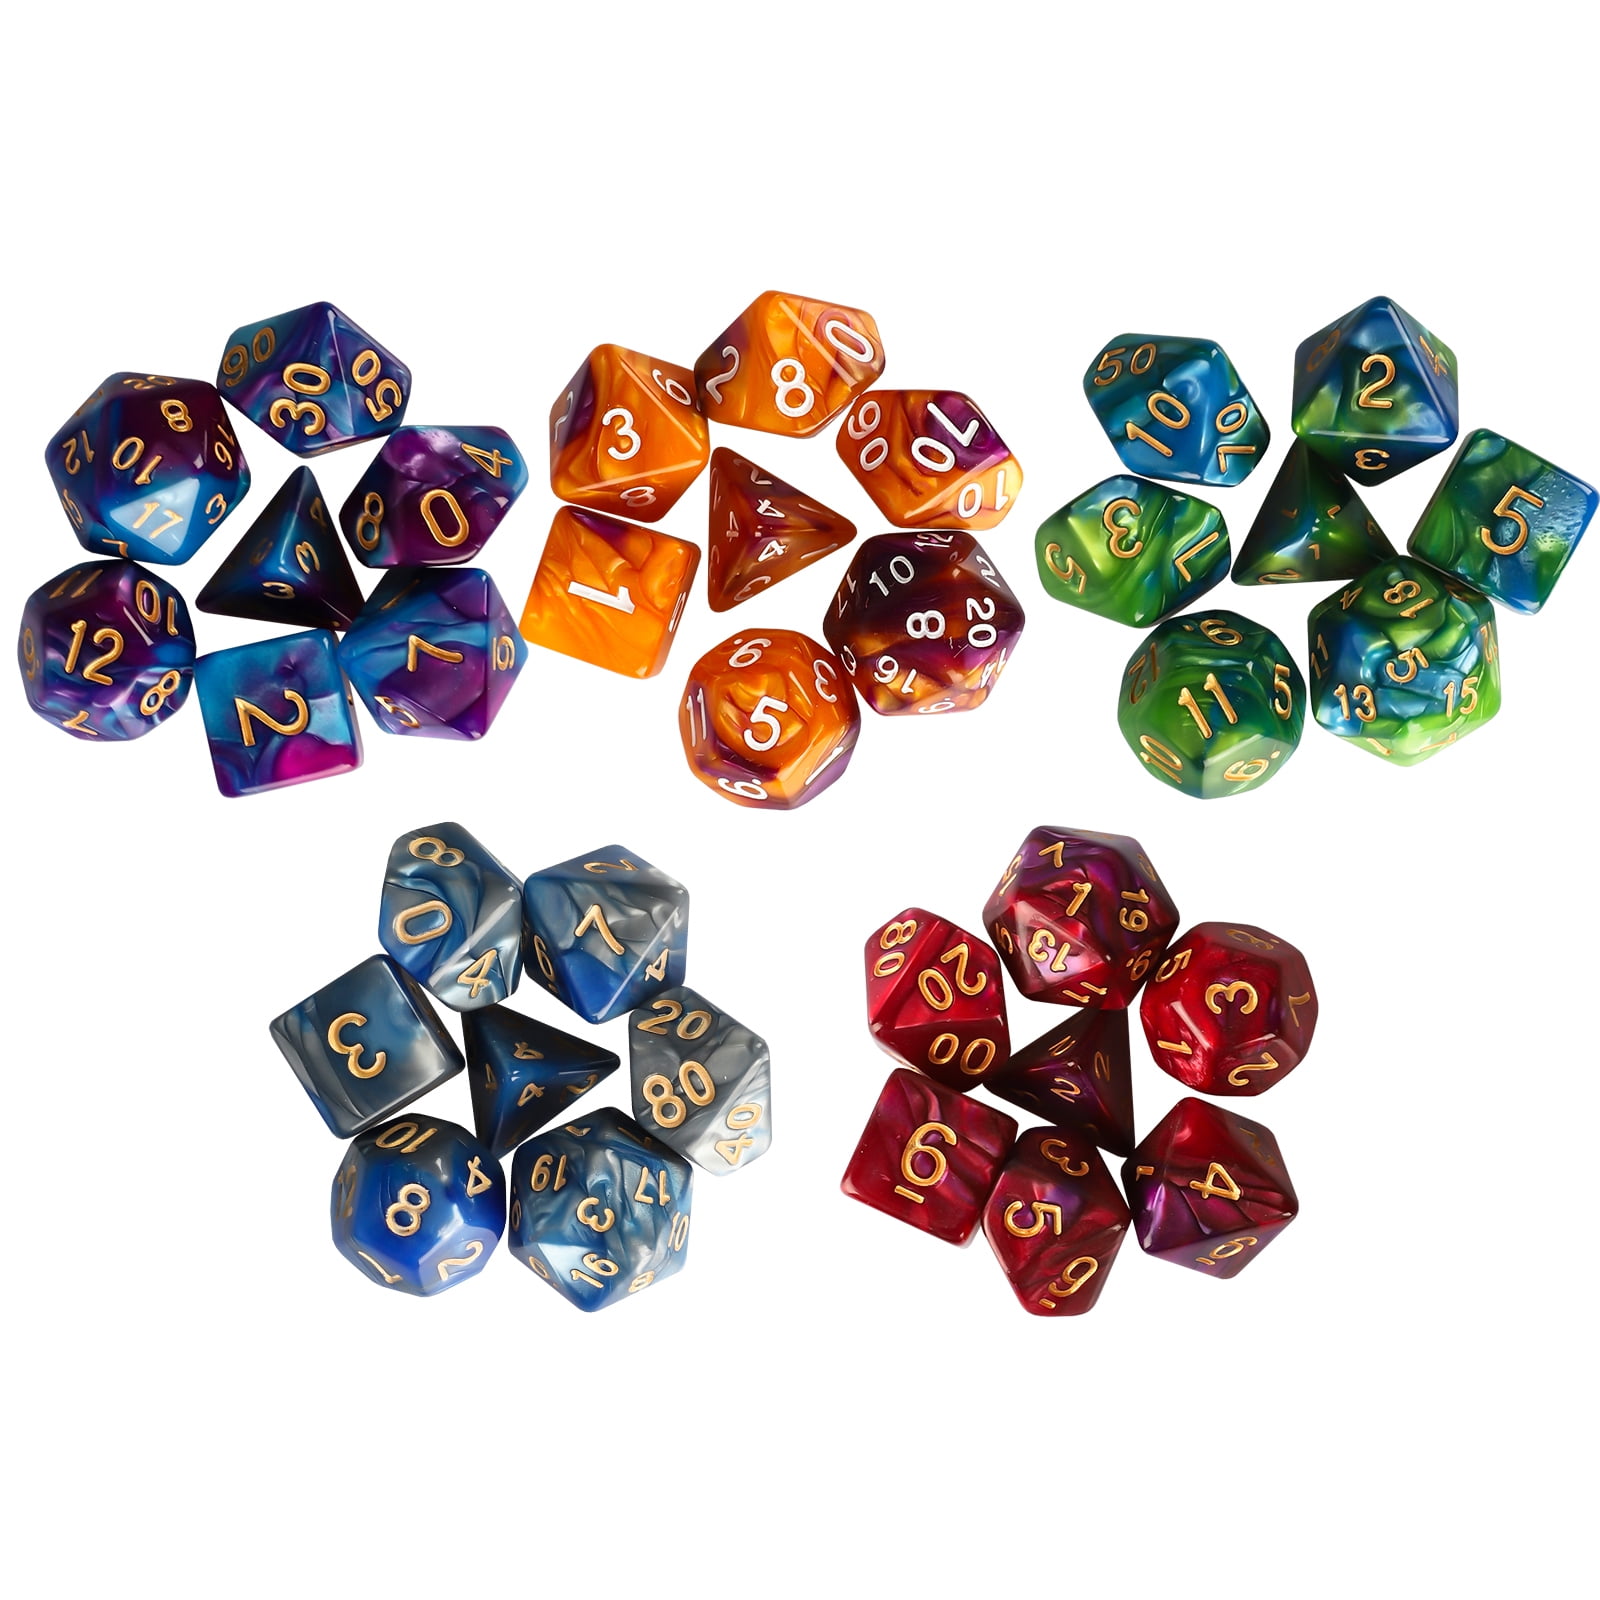 20 Pieces 6 Sided Dice D6 Polyhedral Dice for Dungeons & Dragons Table Games 